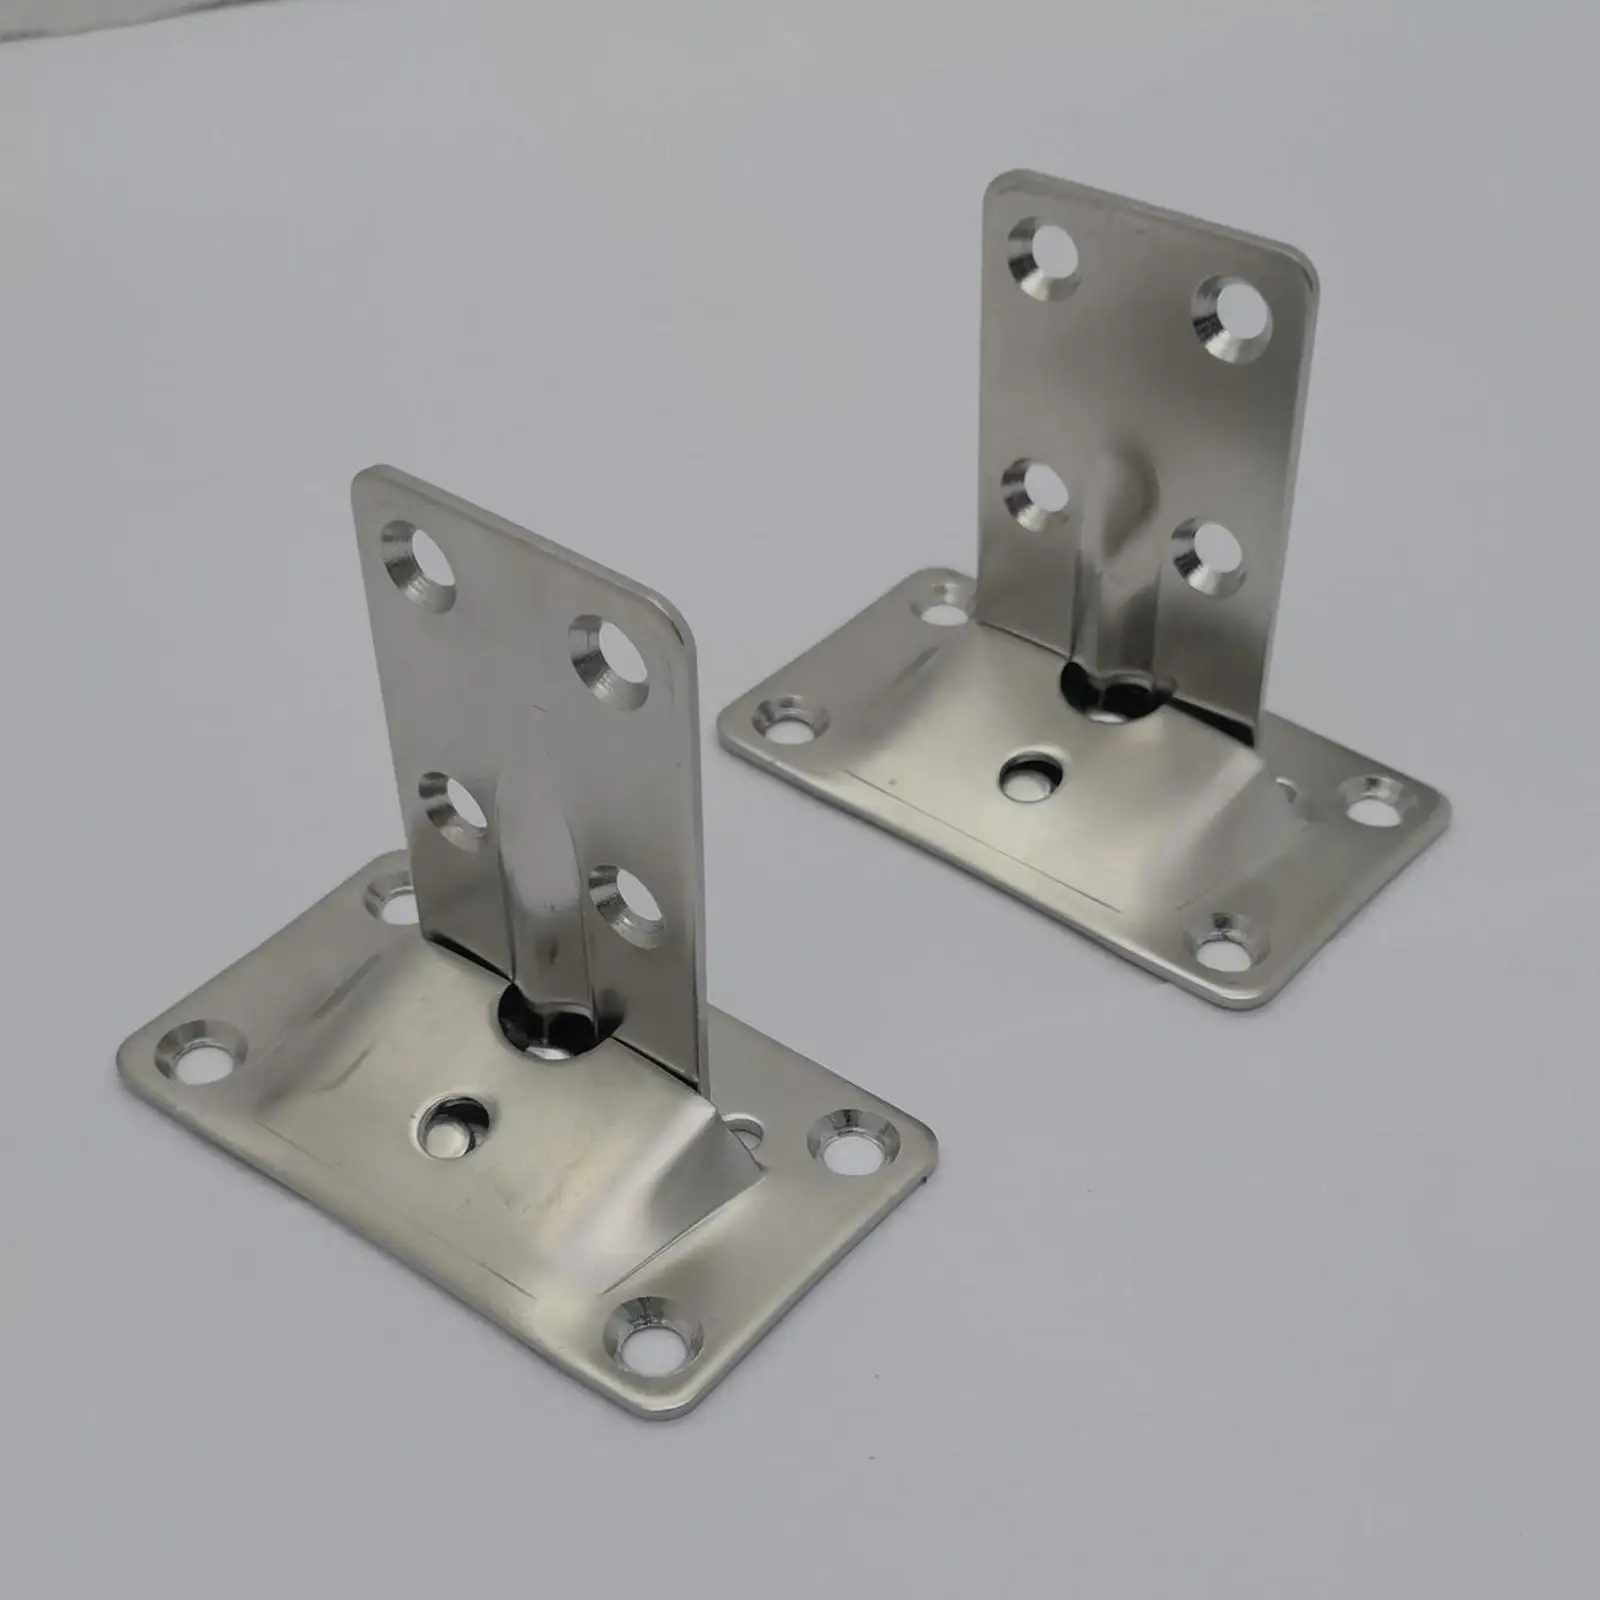 Stainless Steel Bracket Set Removable Multiple Usage Accessories